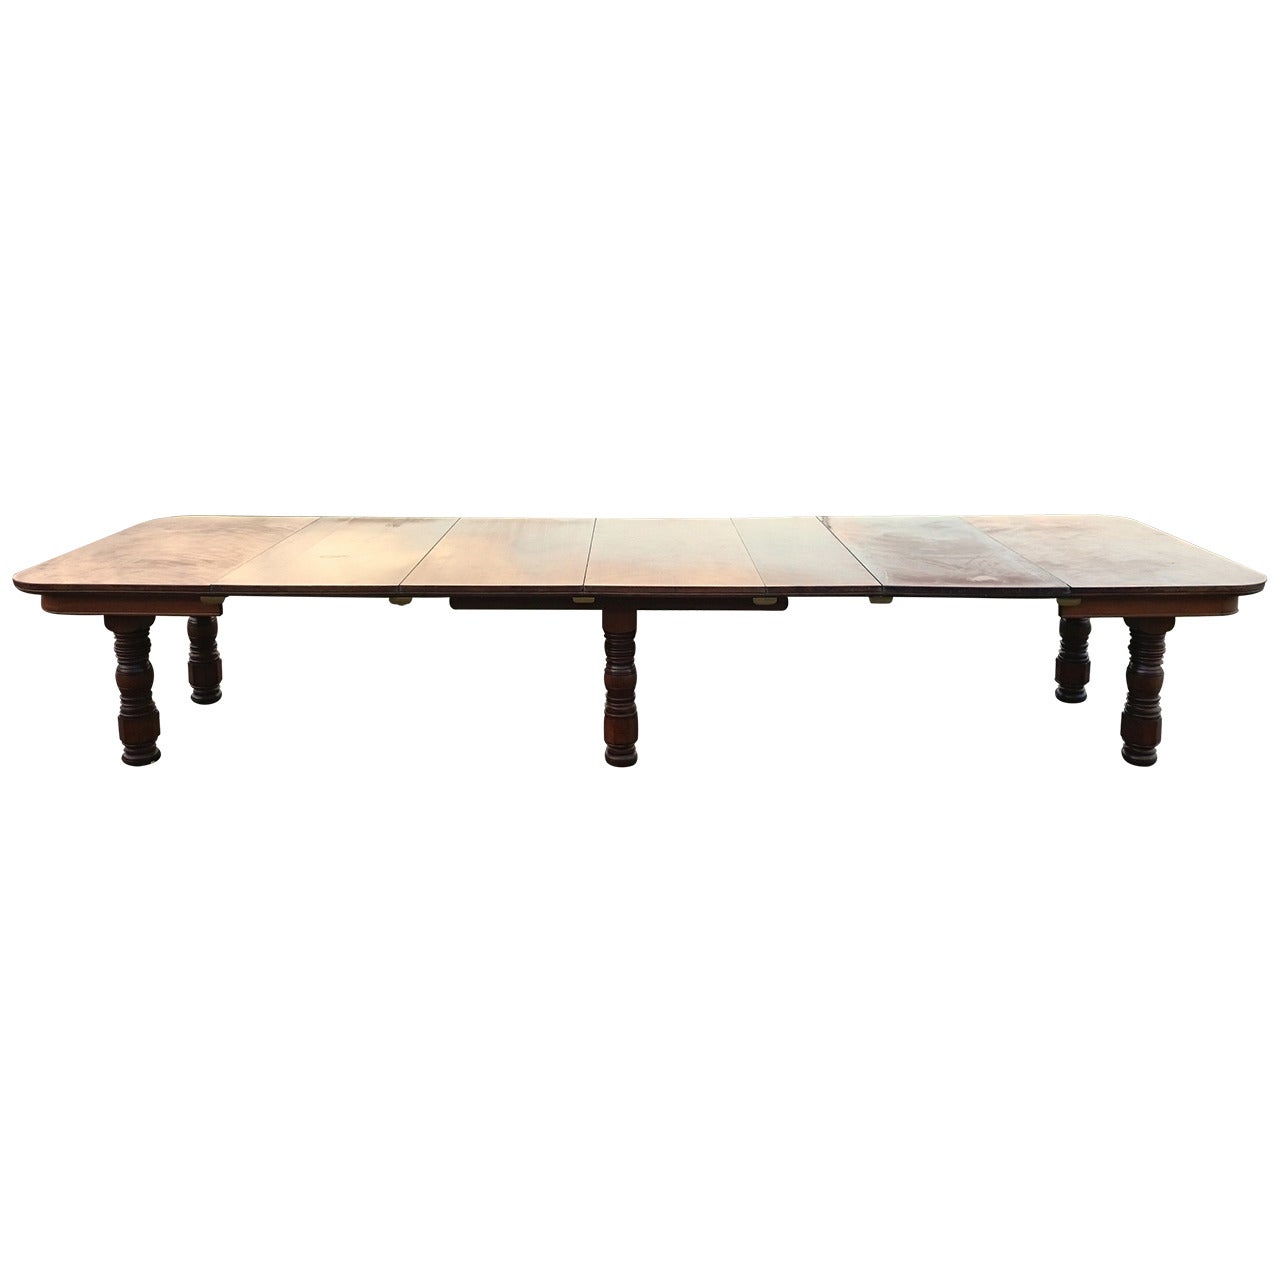 19th Century Holland and Sons Satin Birch Extending Dining Table